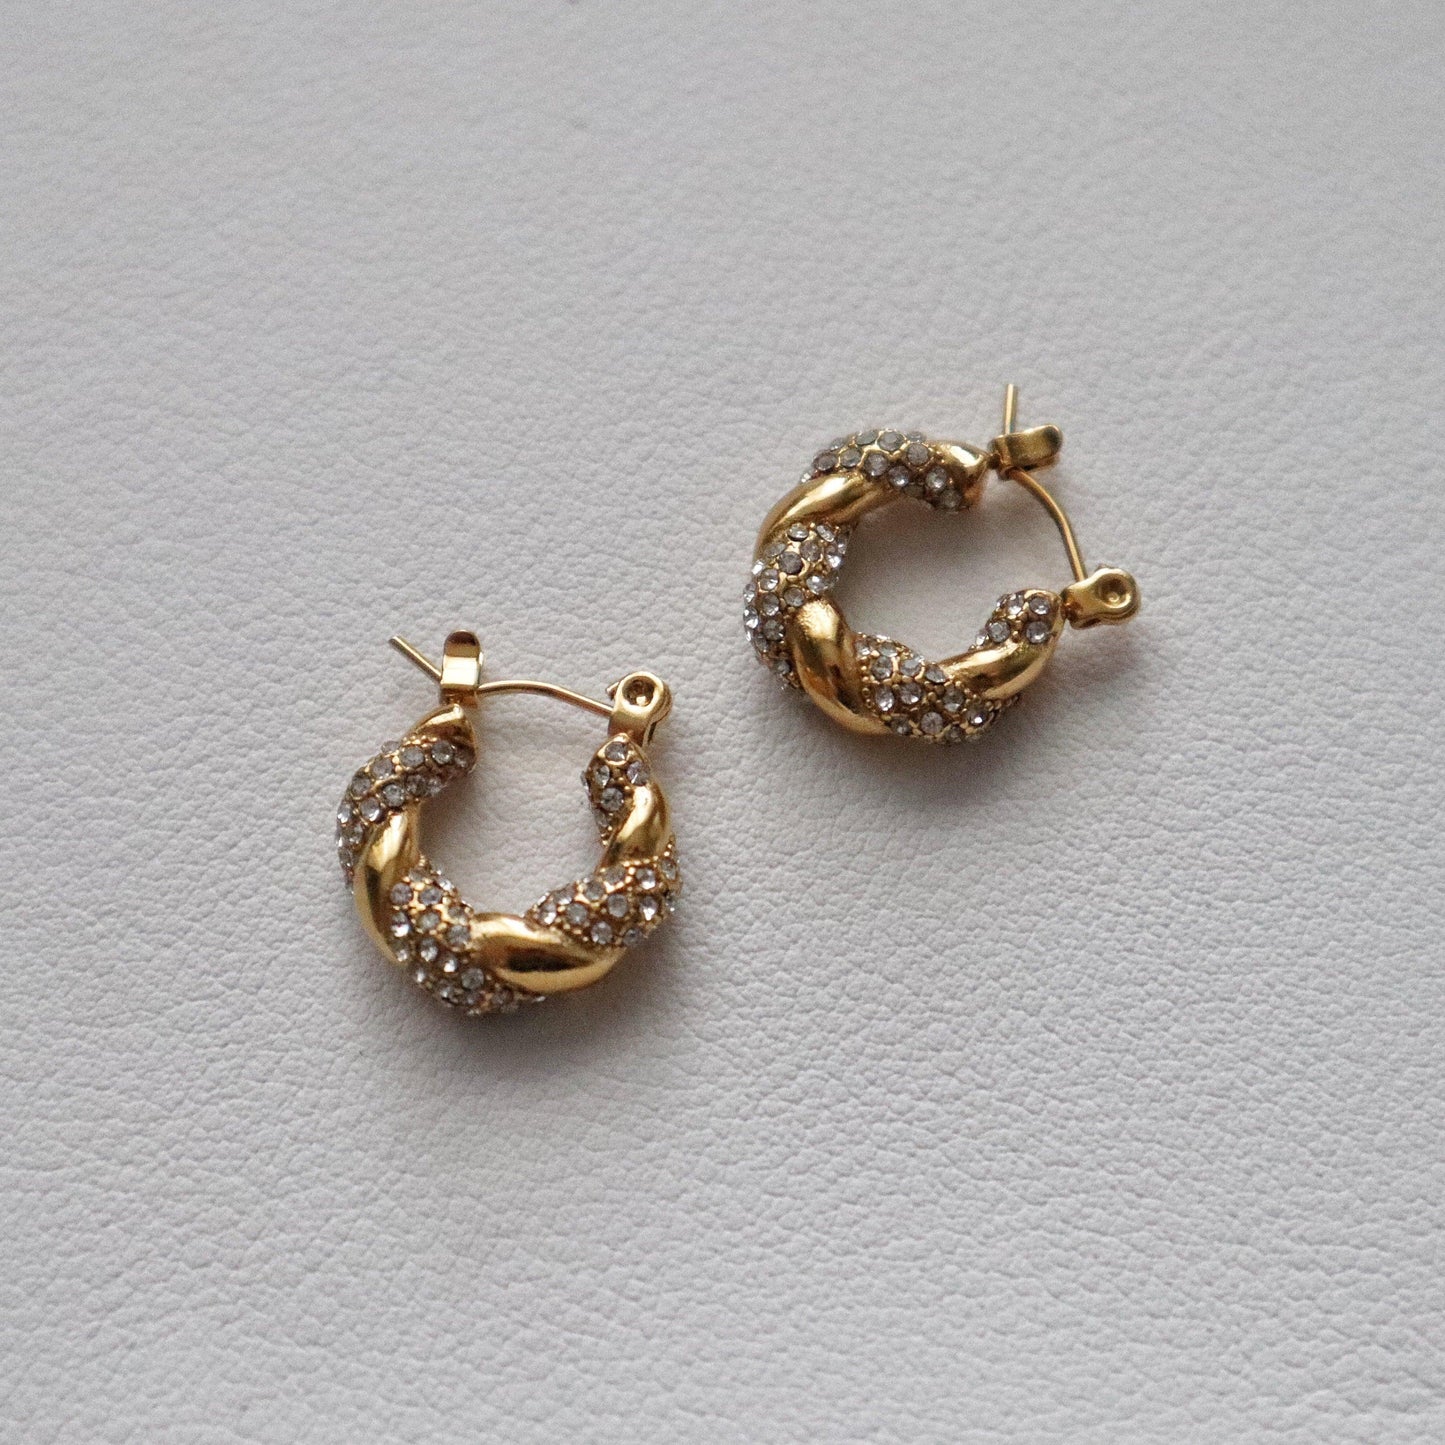 Mia Hoops | Small CZ Hoops - JESSA JEWELRY | GOLD JEWELRY; dainty, affordable gold everyday jewelry. Tarnish free, water-resistant, hypoallergenic. Jewelry for everyday wear